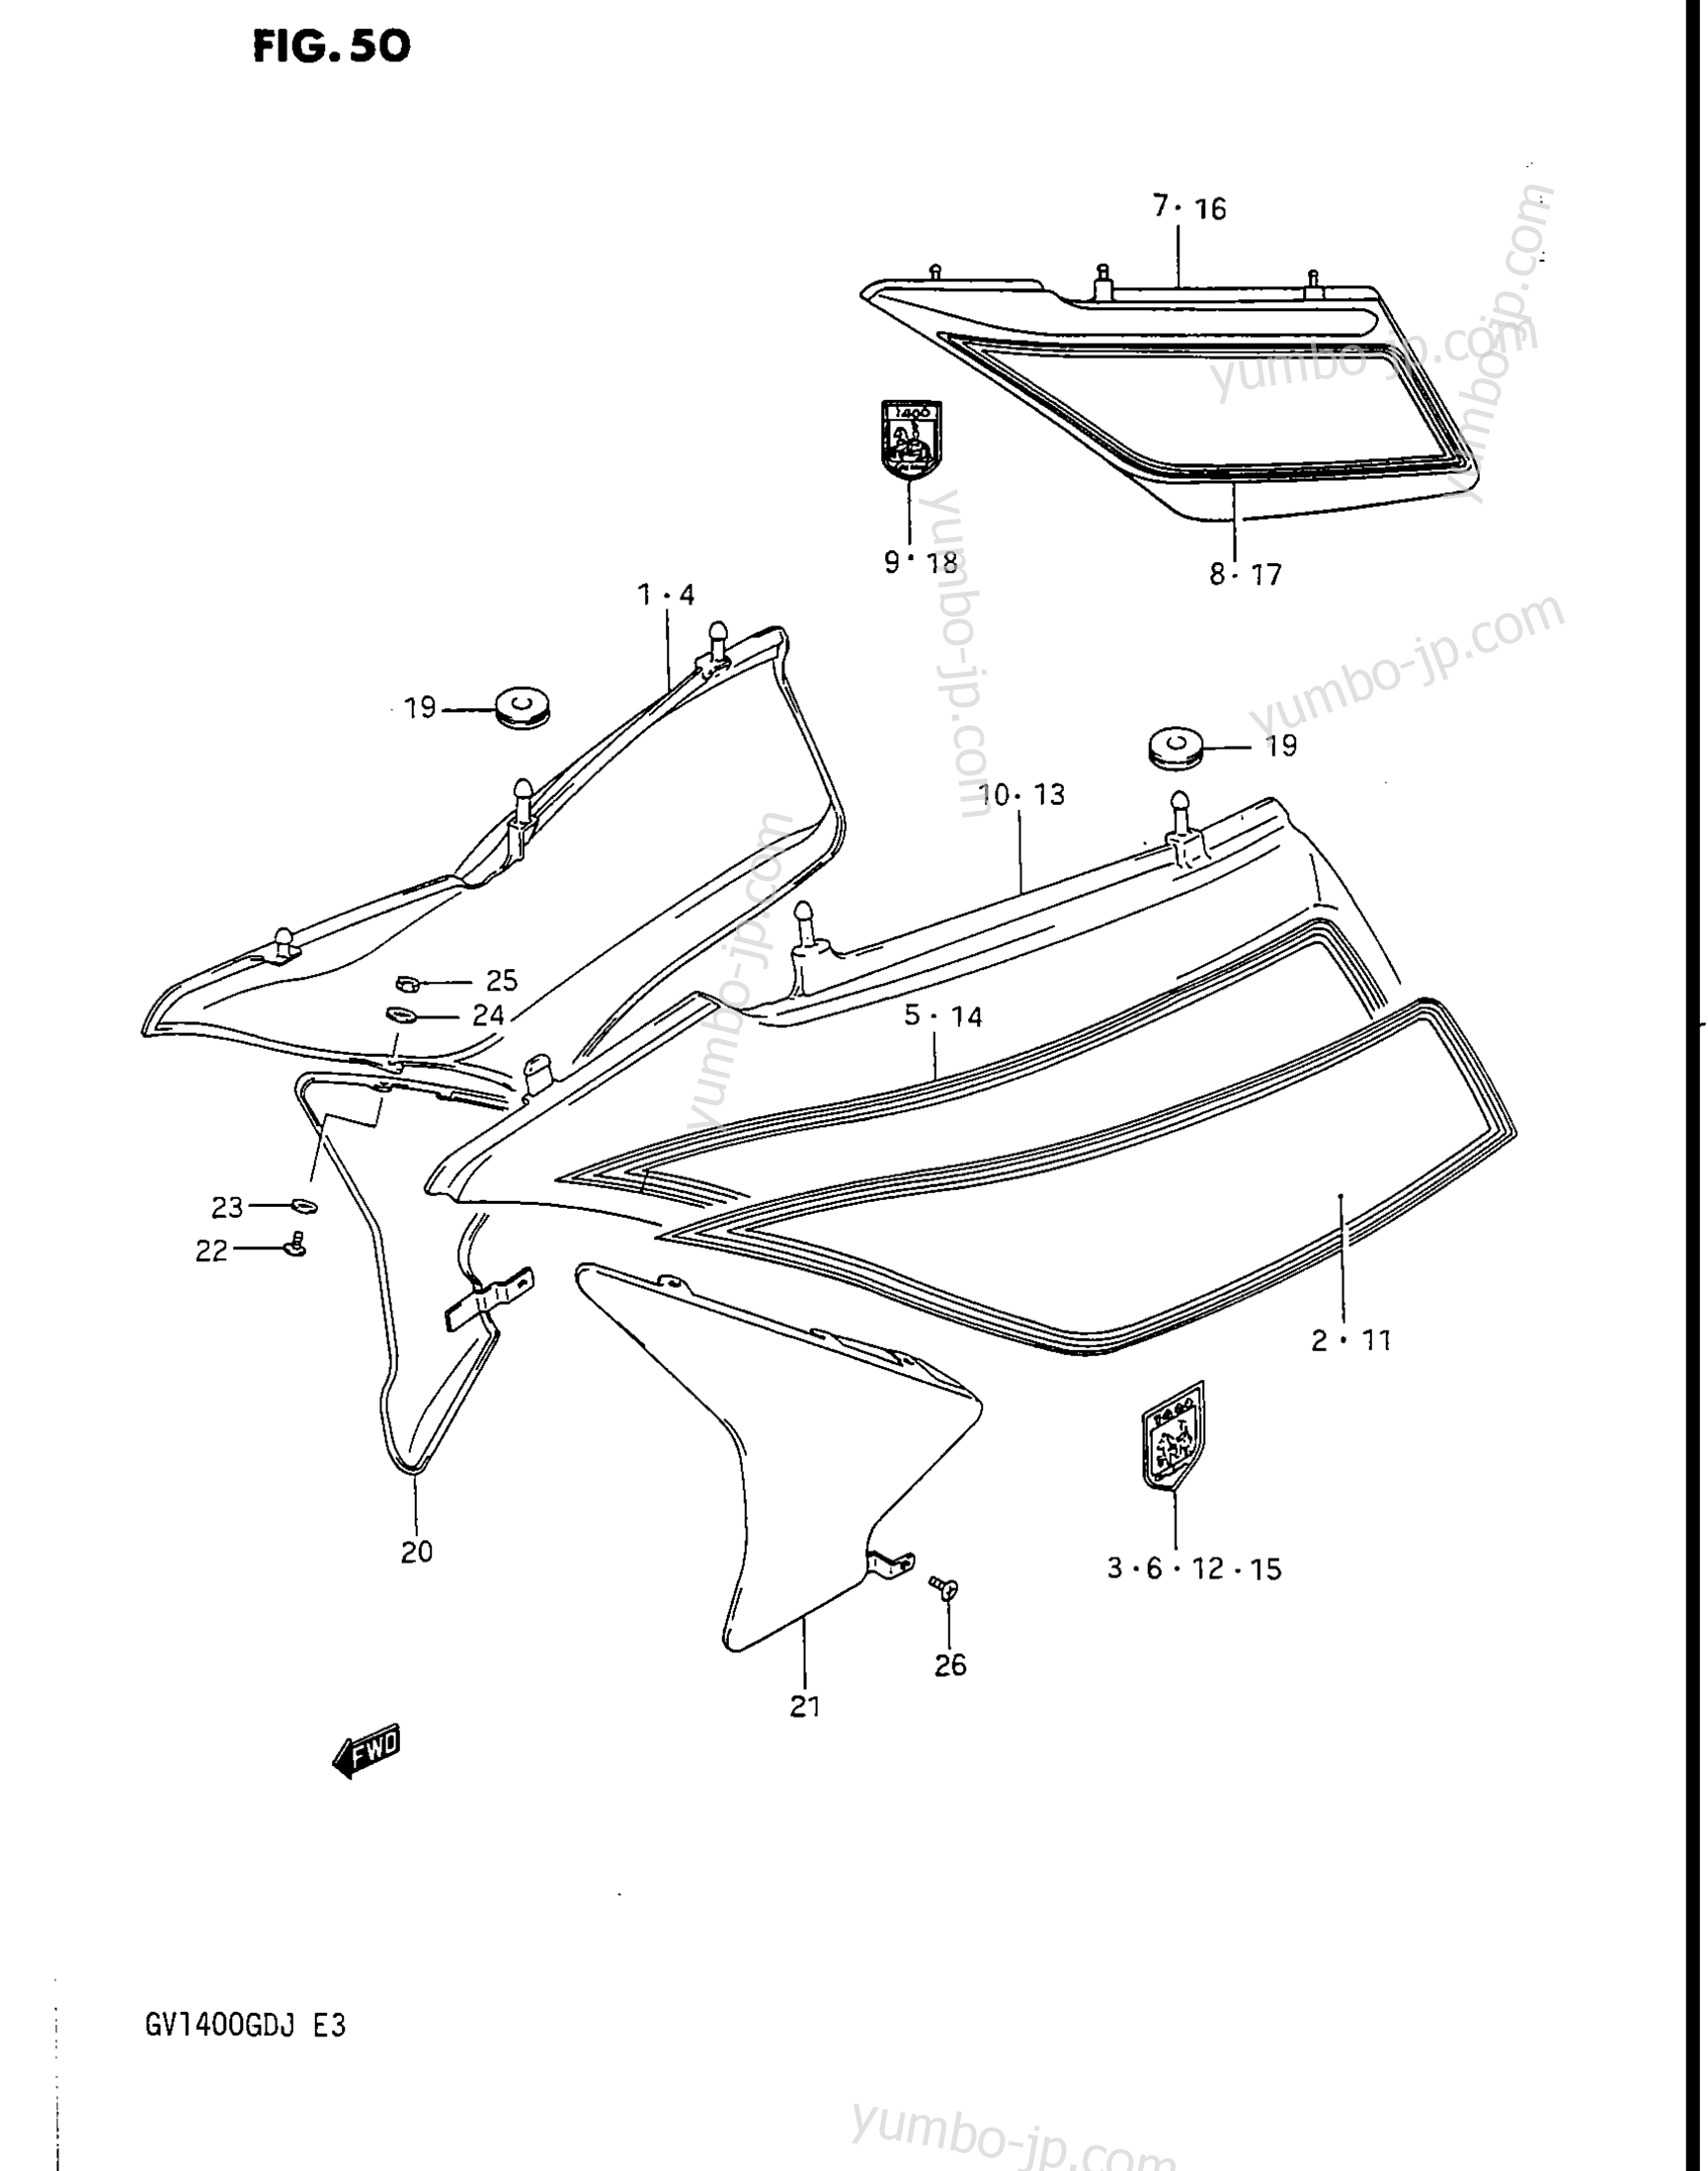 FRAME COVER (MODEL H/J) for motorcycles SUZUKI Cavalcade (GV1400GT) 1988 year